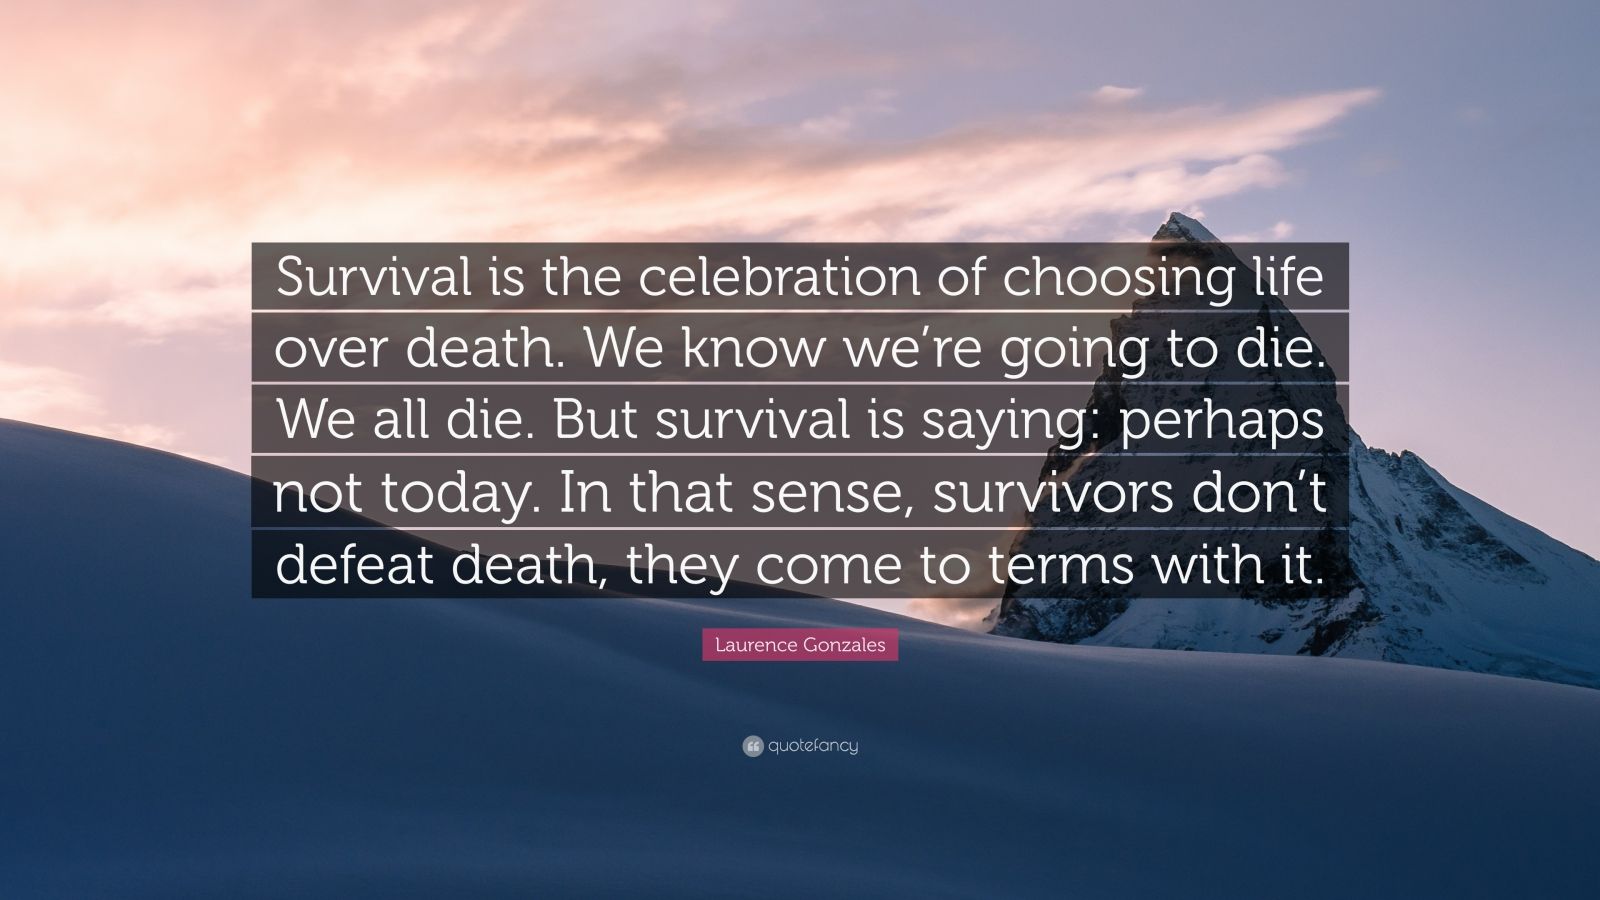 Laurence Gonzales Quote: “Survival is the celebration of choosing life